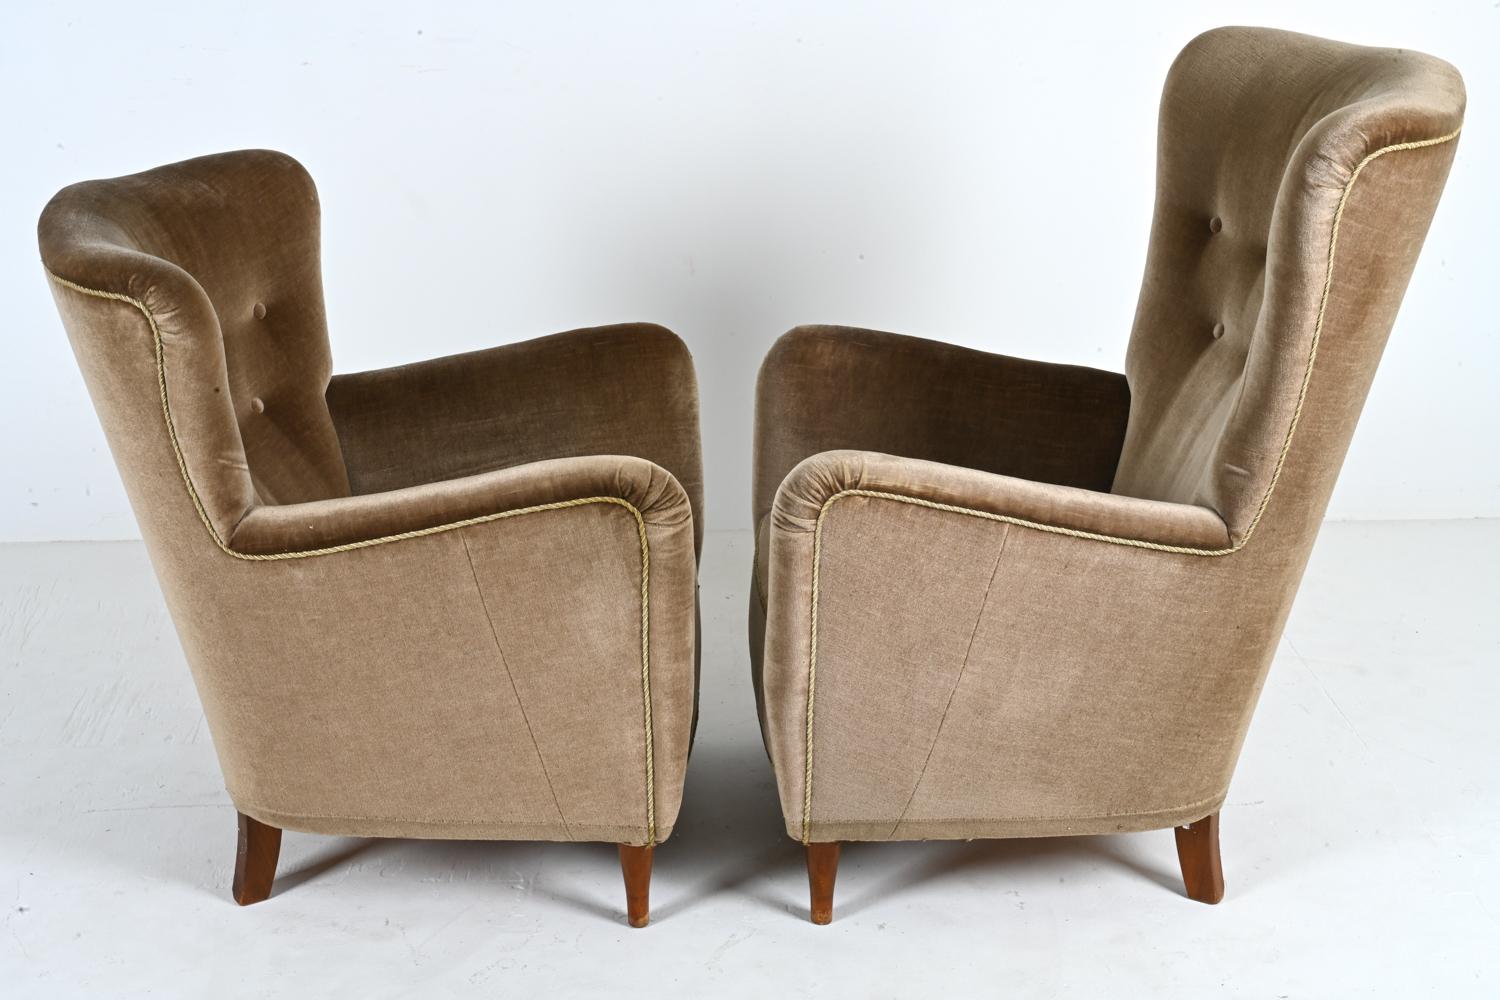 Two Danish Easy Chairs, Manner of Frits Henningsen, c. 1950's For Sale 8